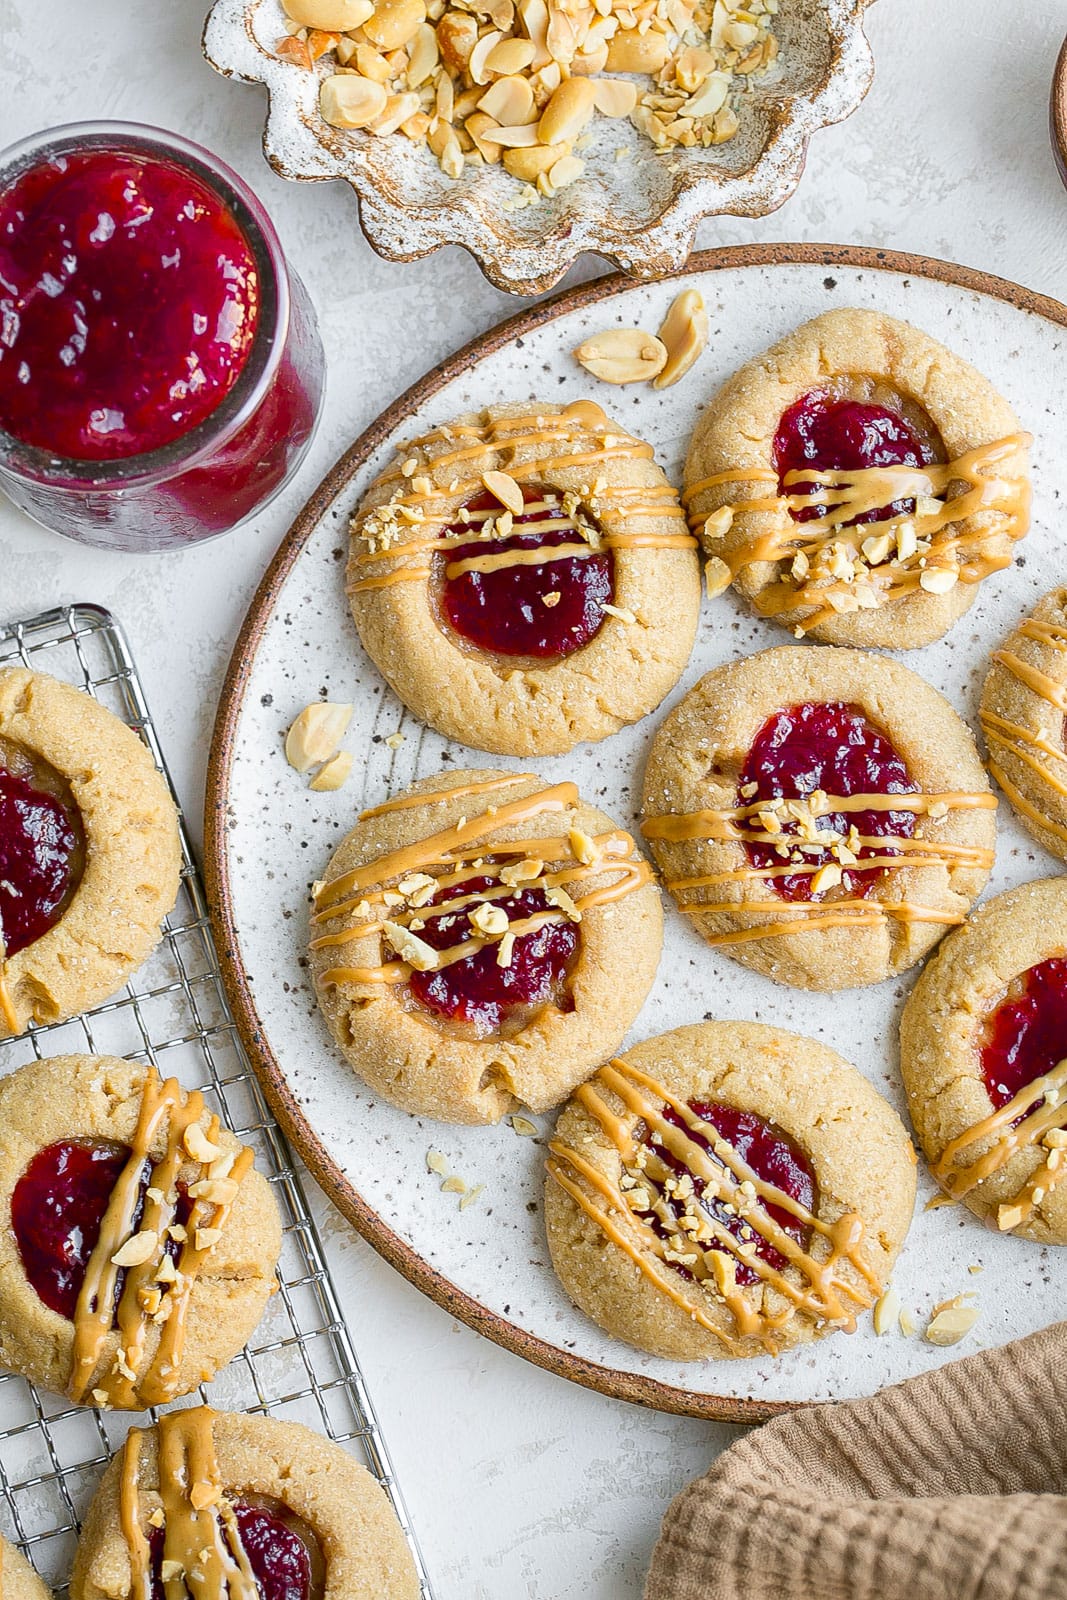 Cookies with jelly on a plate.